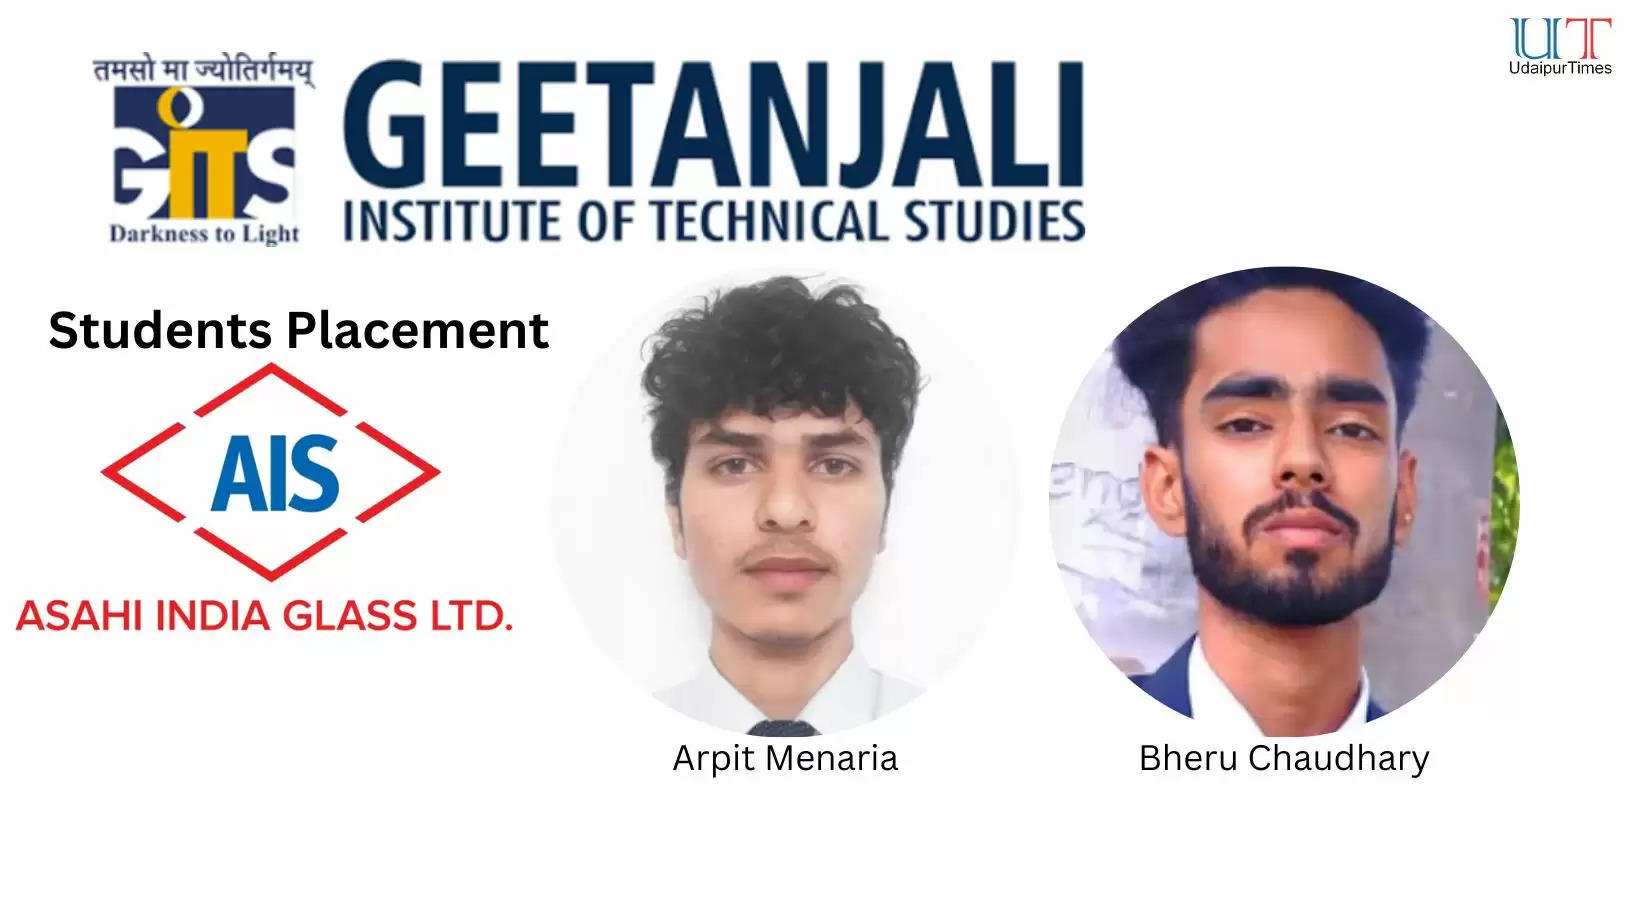 two students from Mechanical Engineering Branch at Gitanjali Institute (GITS) Udaipur selected at Asahi India Glass Ltd